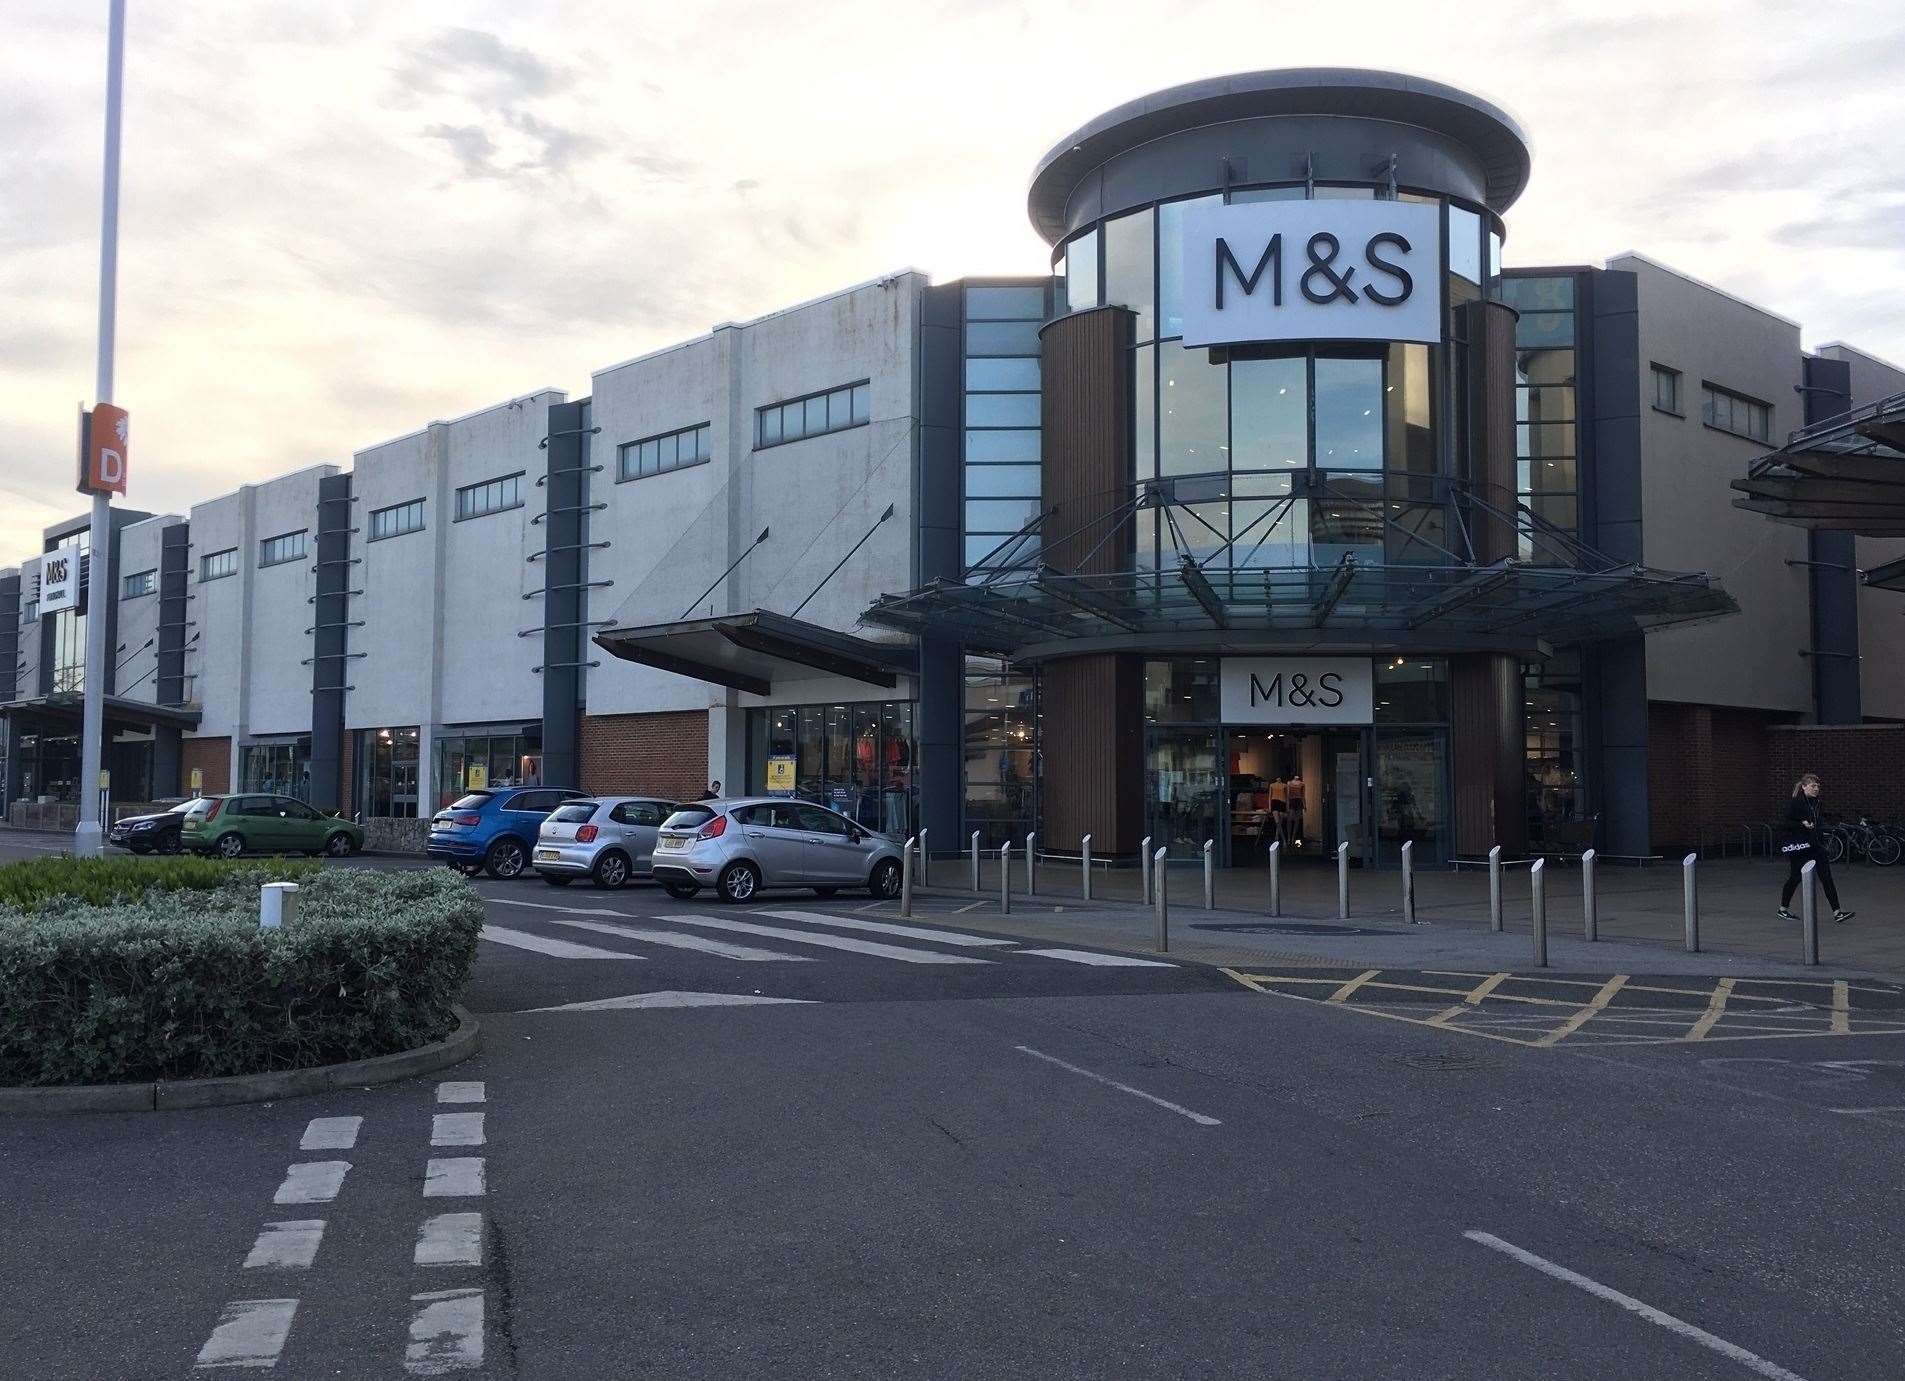 The Marks and Spencer store at Westwood Cross